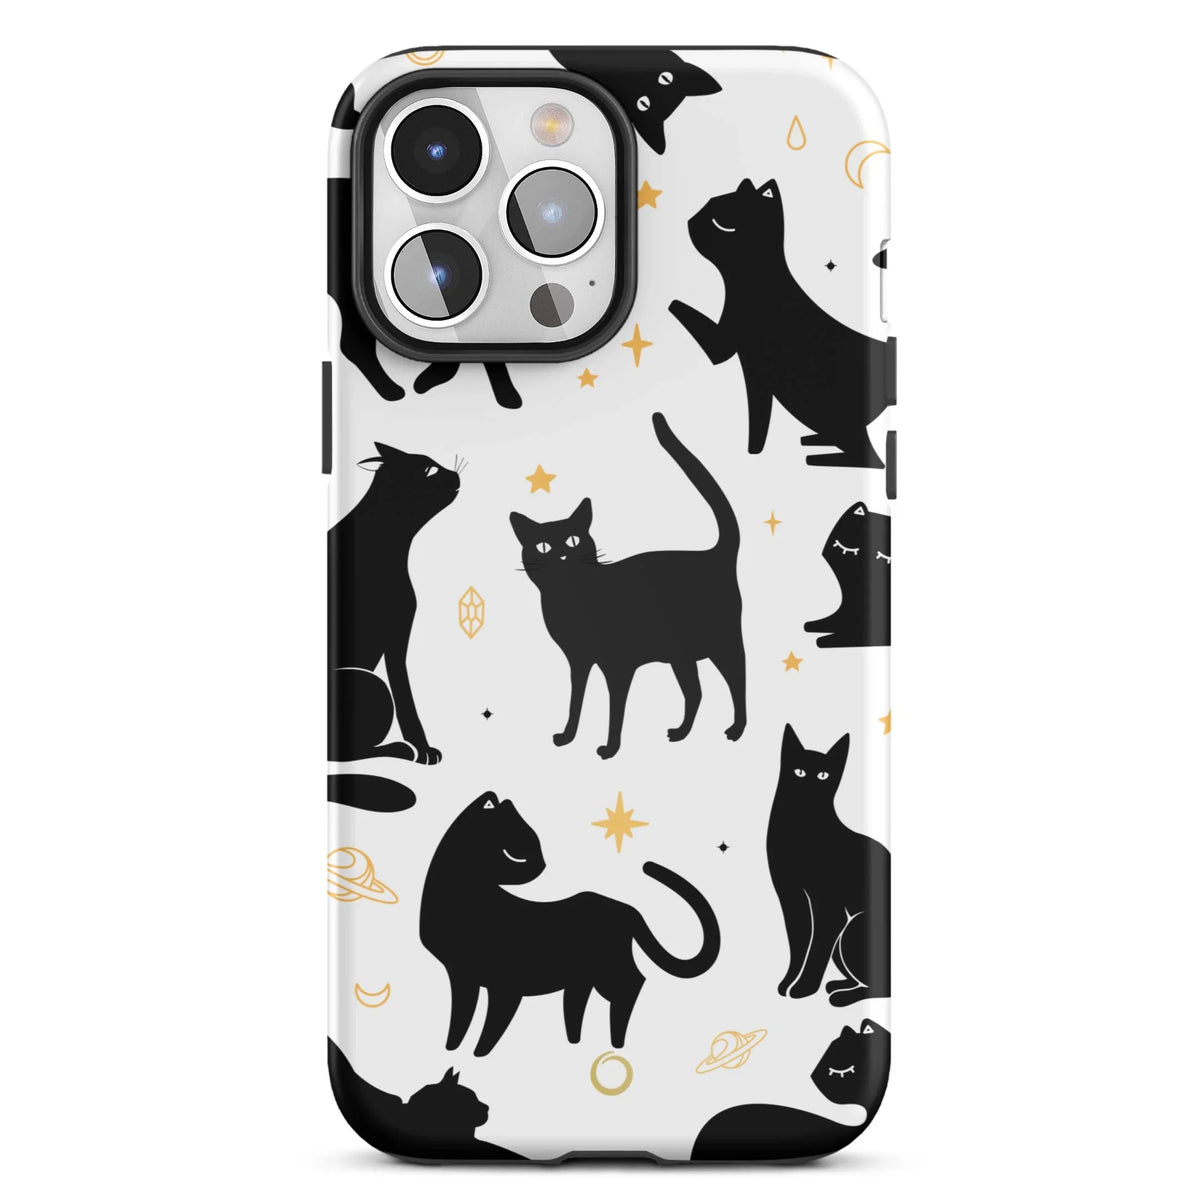 Black Cats iPhone Case - Select a Device